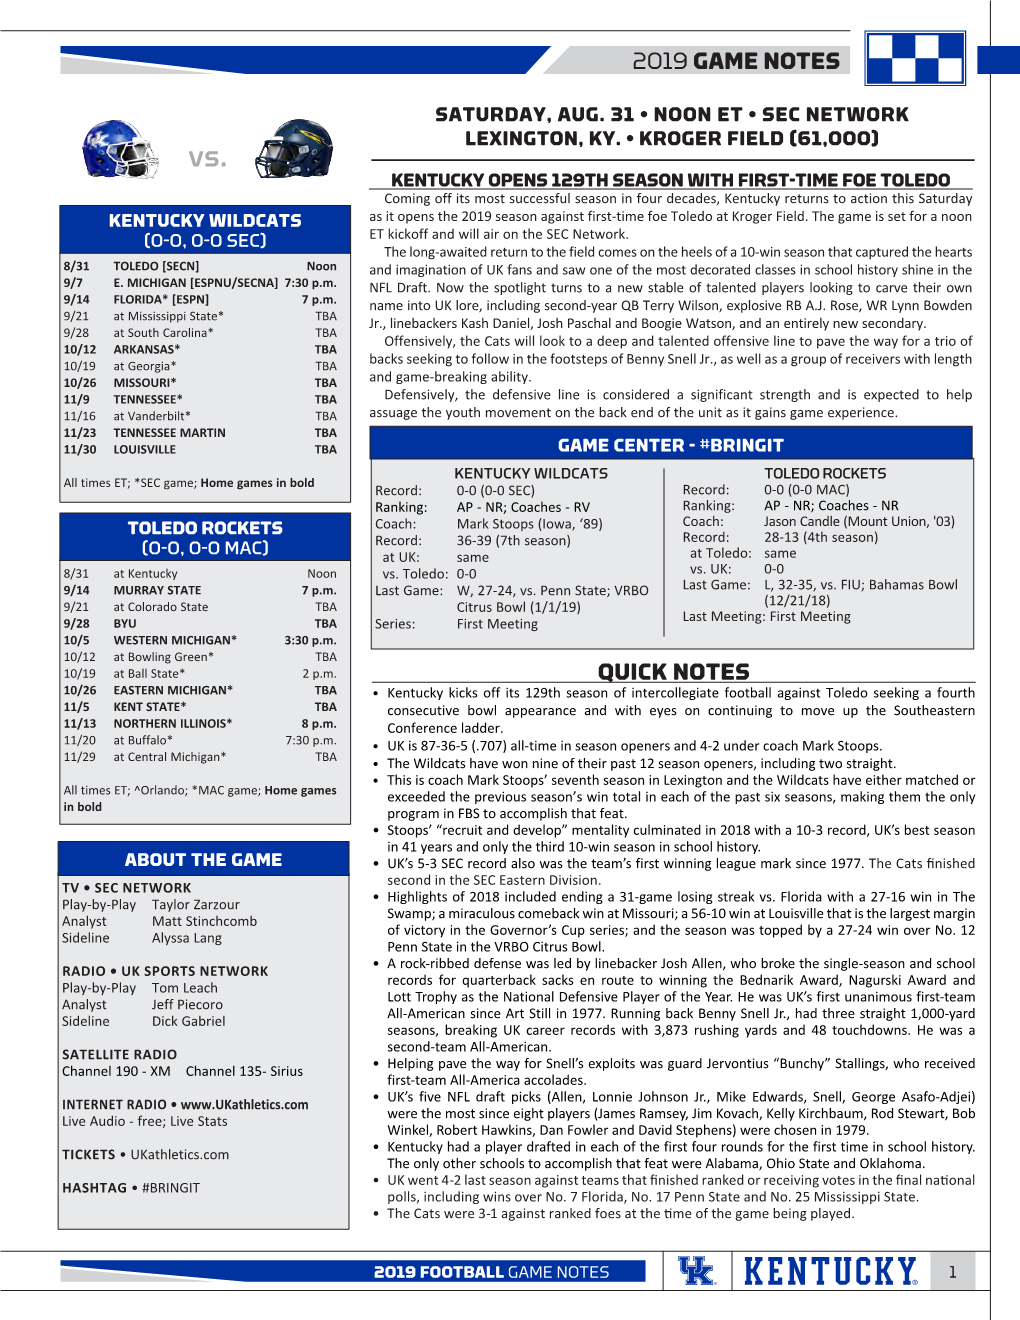 2019 Game Notes Quick Notes